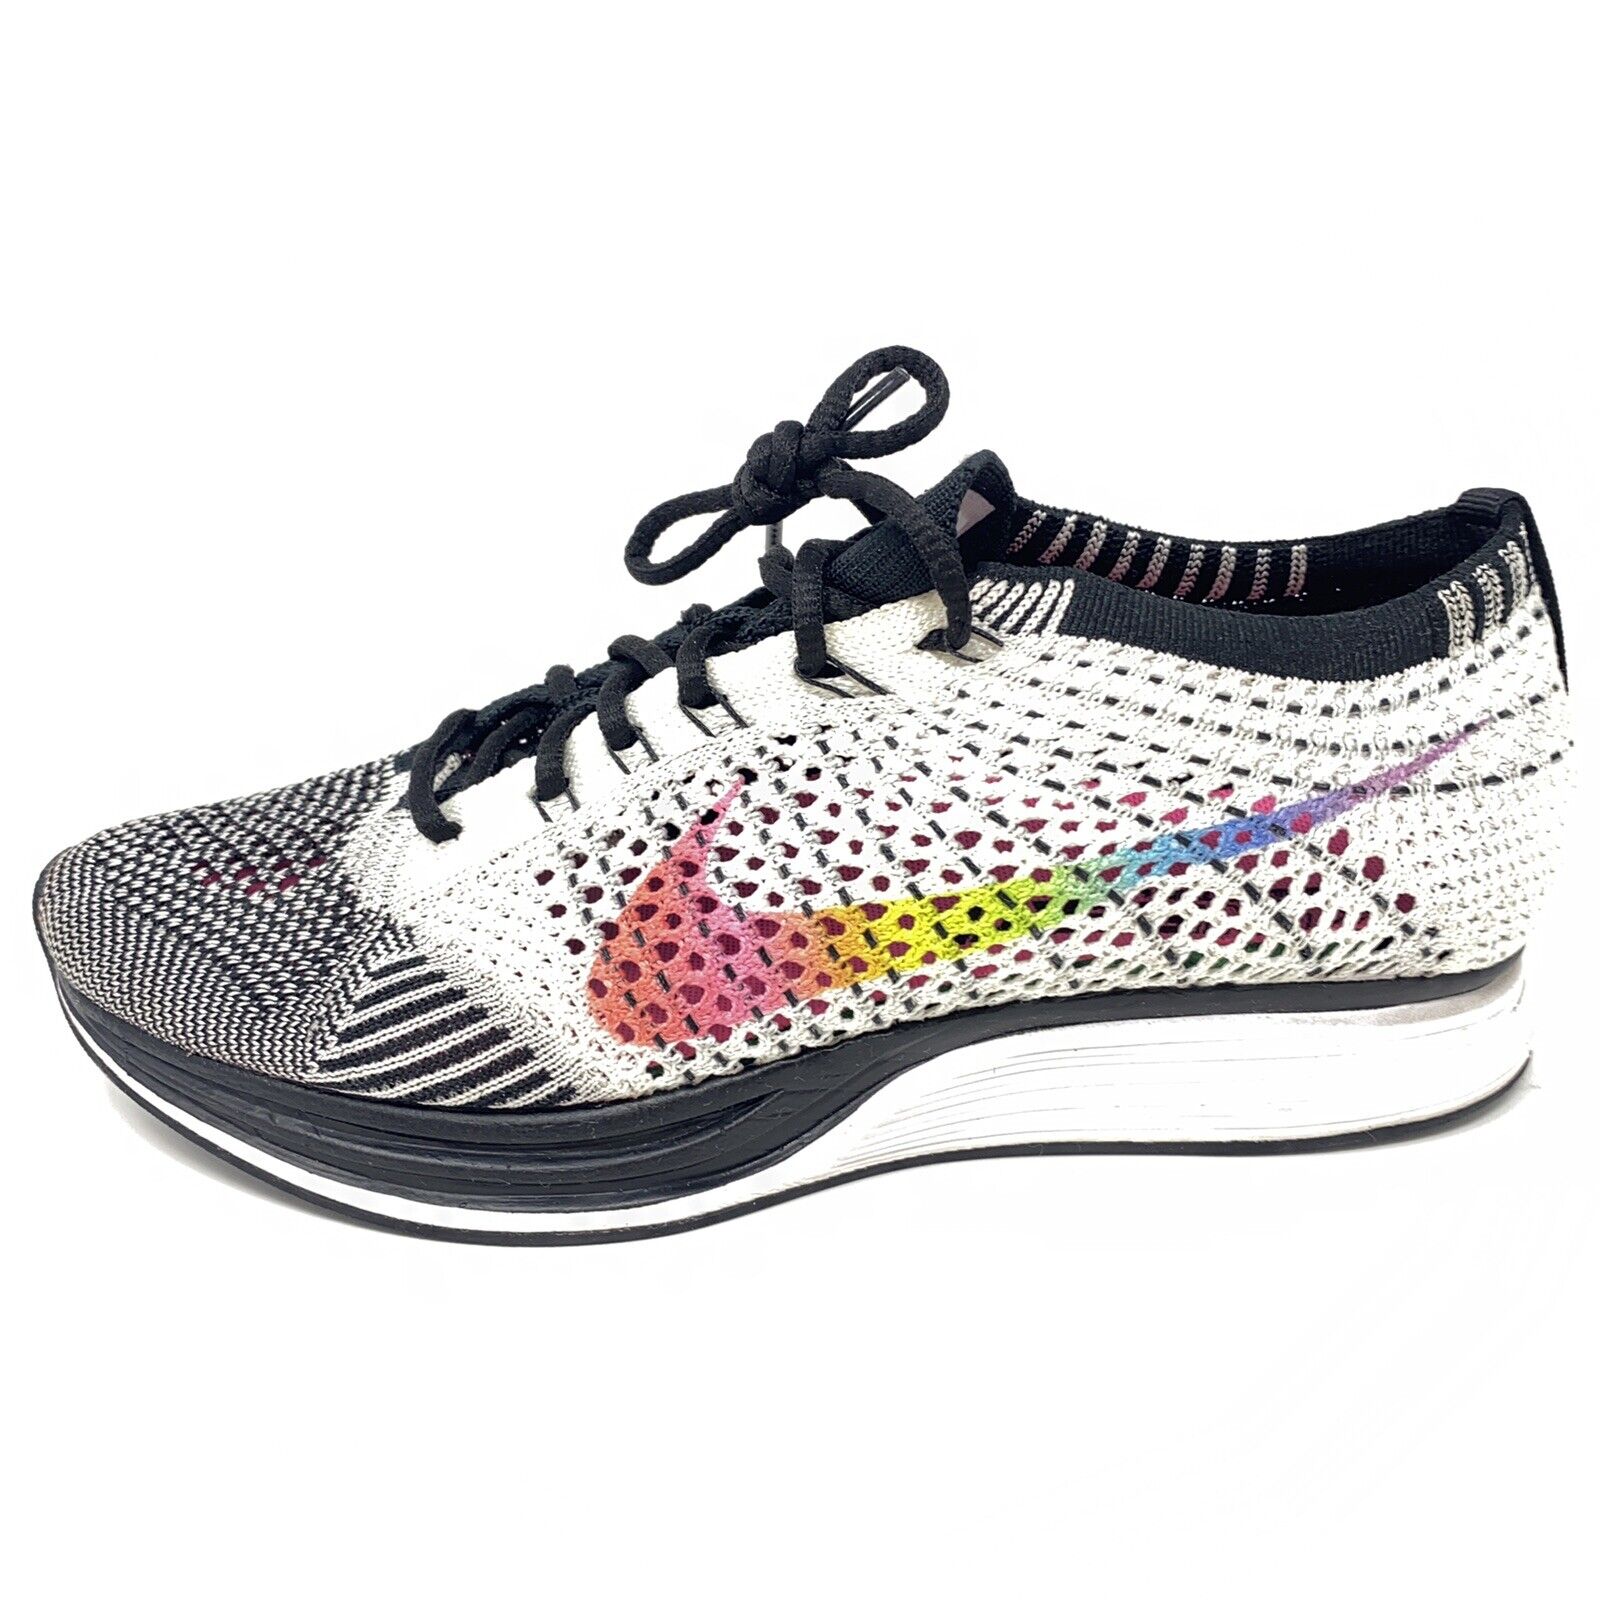 Touhou Poetry pregnant Size 6.5 - Nike Flyknit Racer Be True 2017 for sale online | eBay